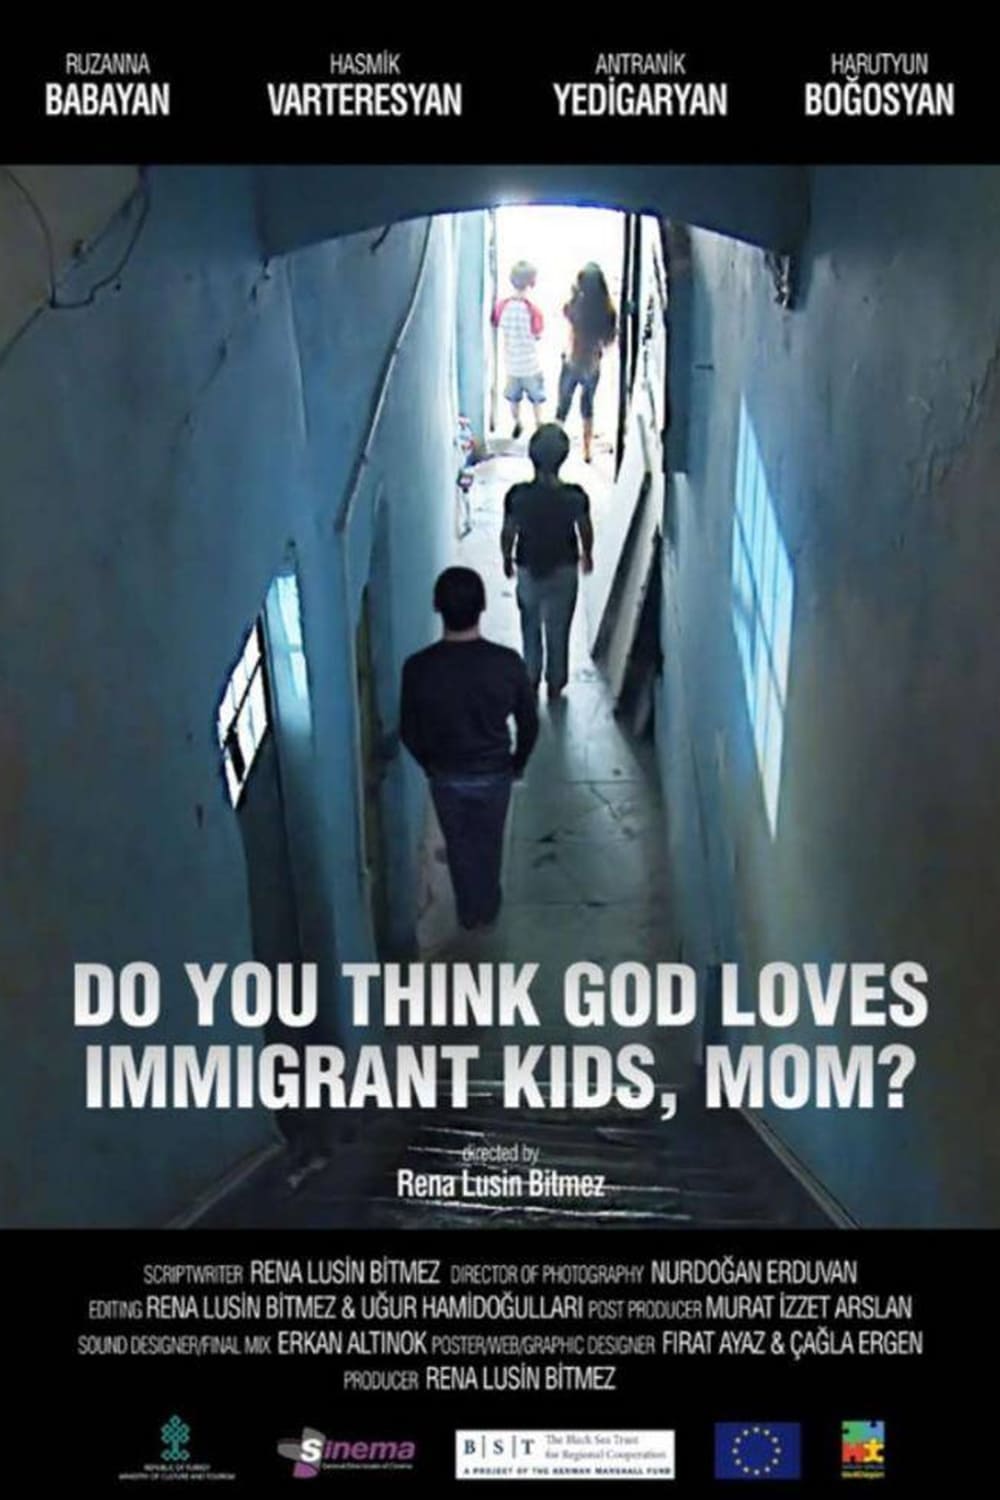 Do You Think God Loves Immigrant Kids, Mom?